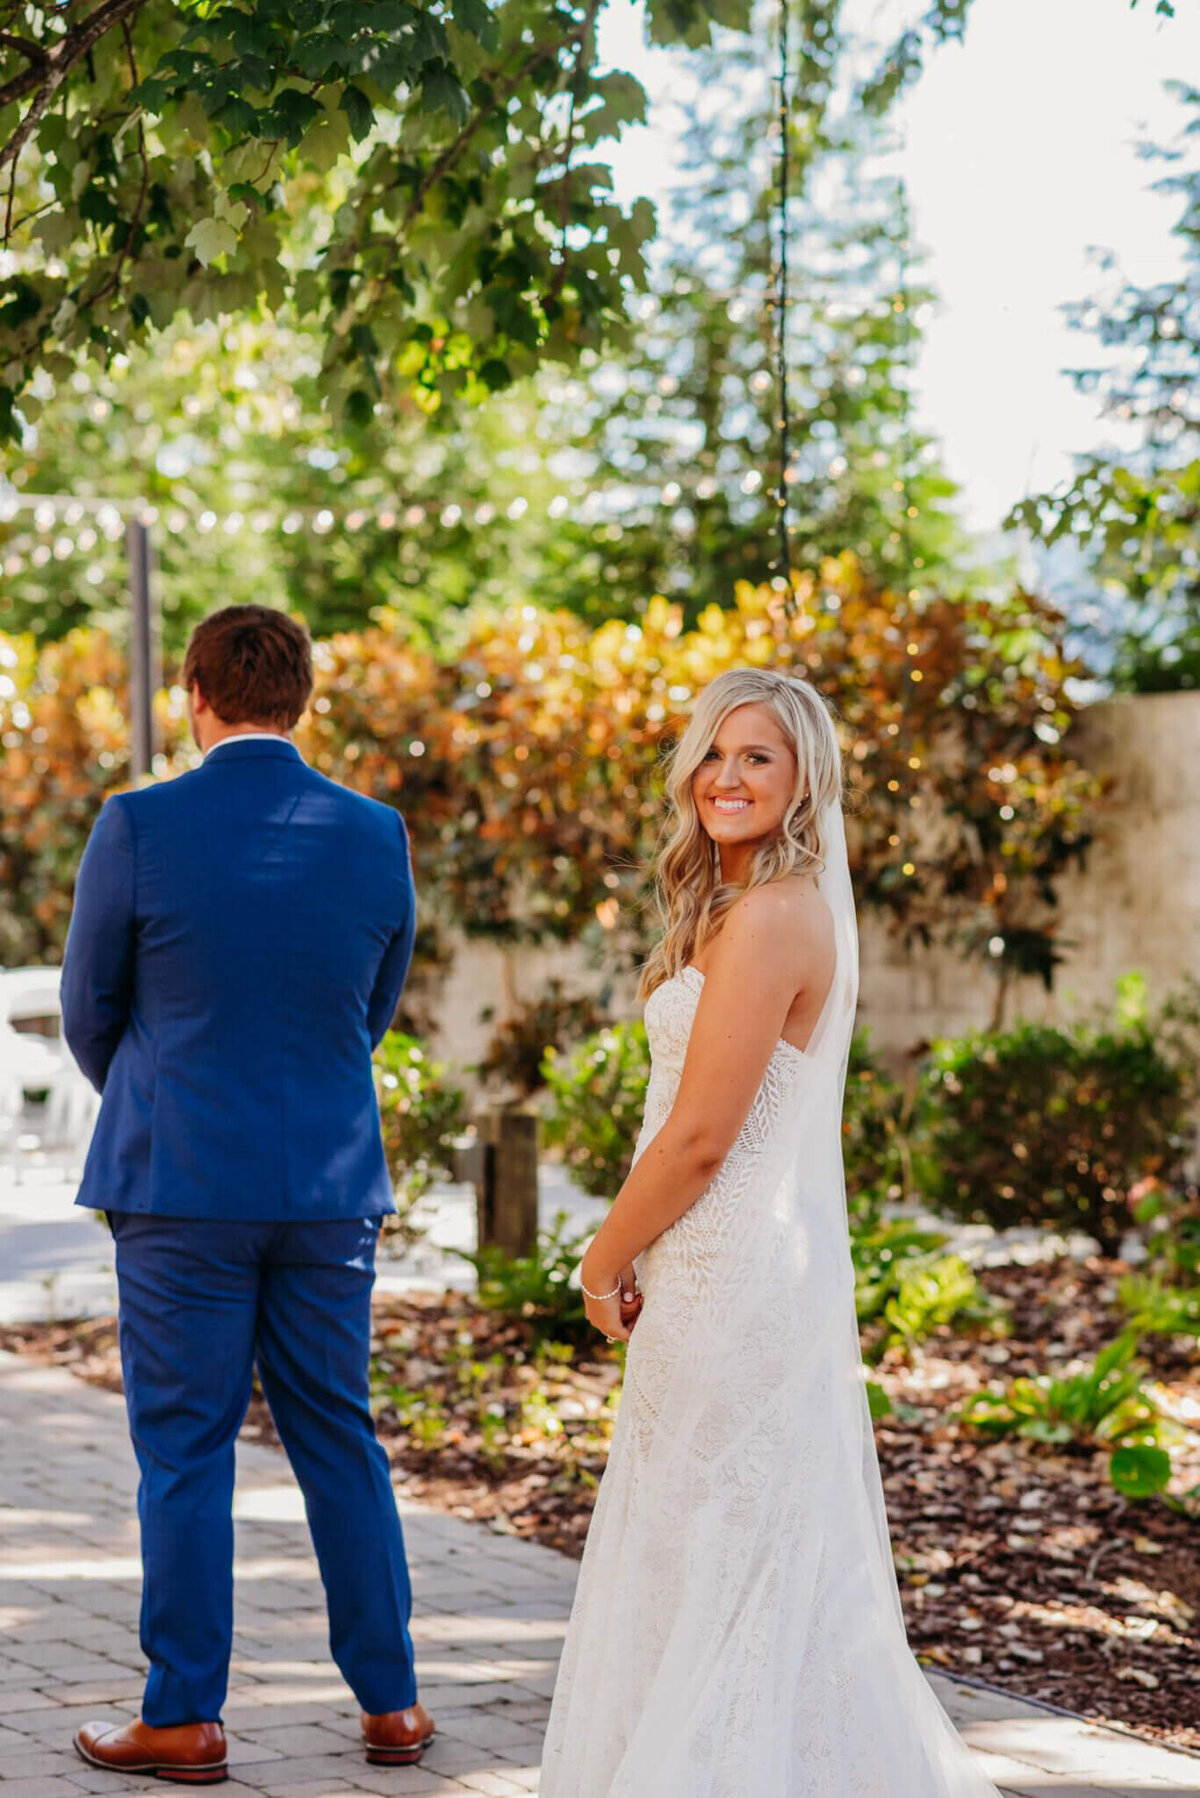 photo of a bride smiling over her shoulder while her groom faces away